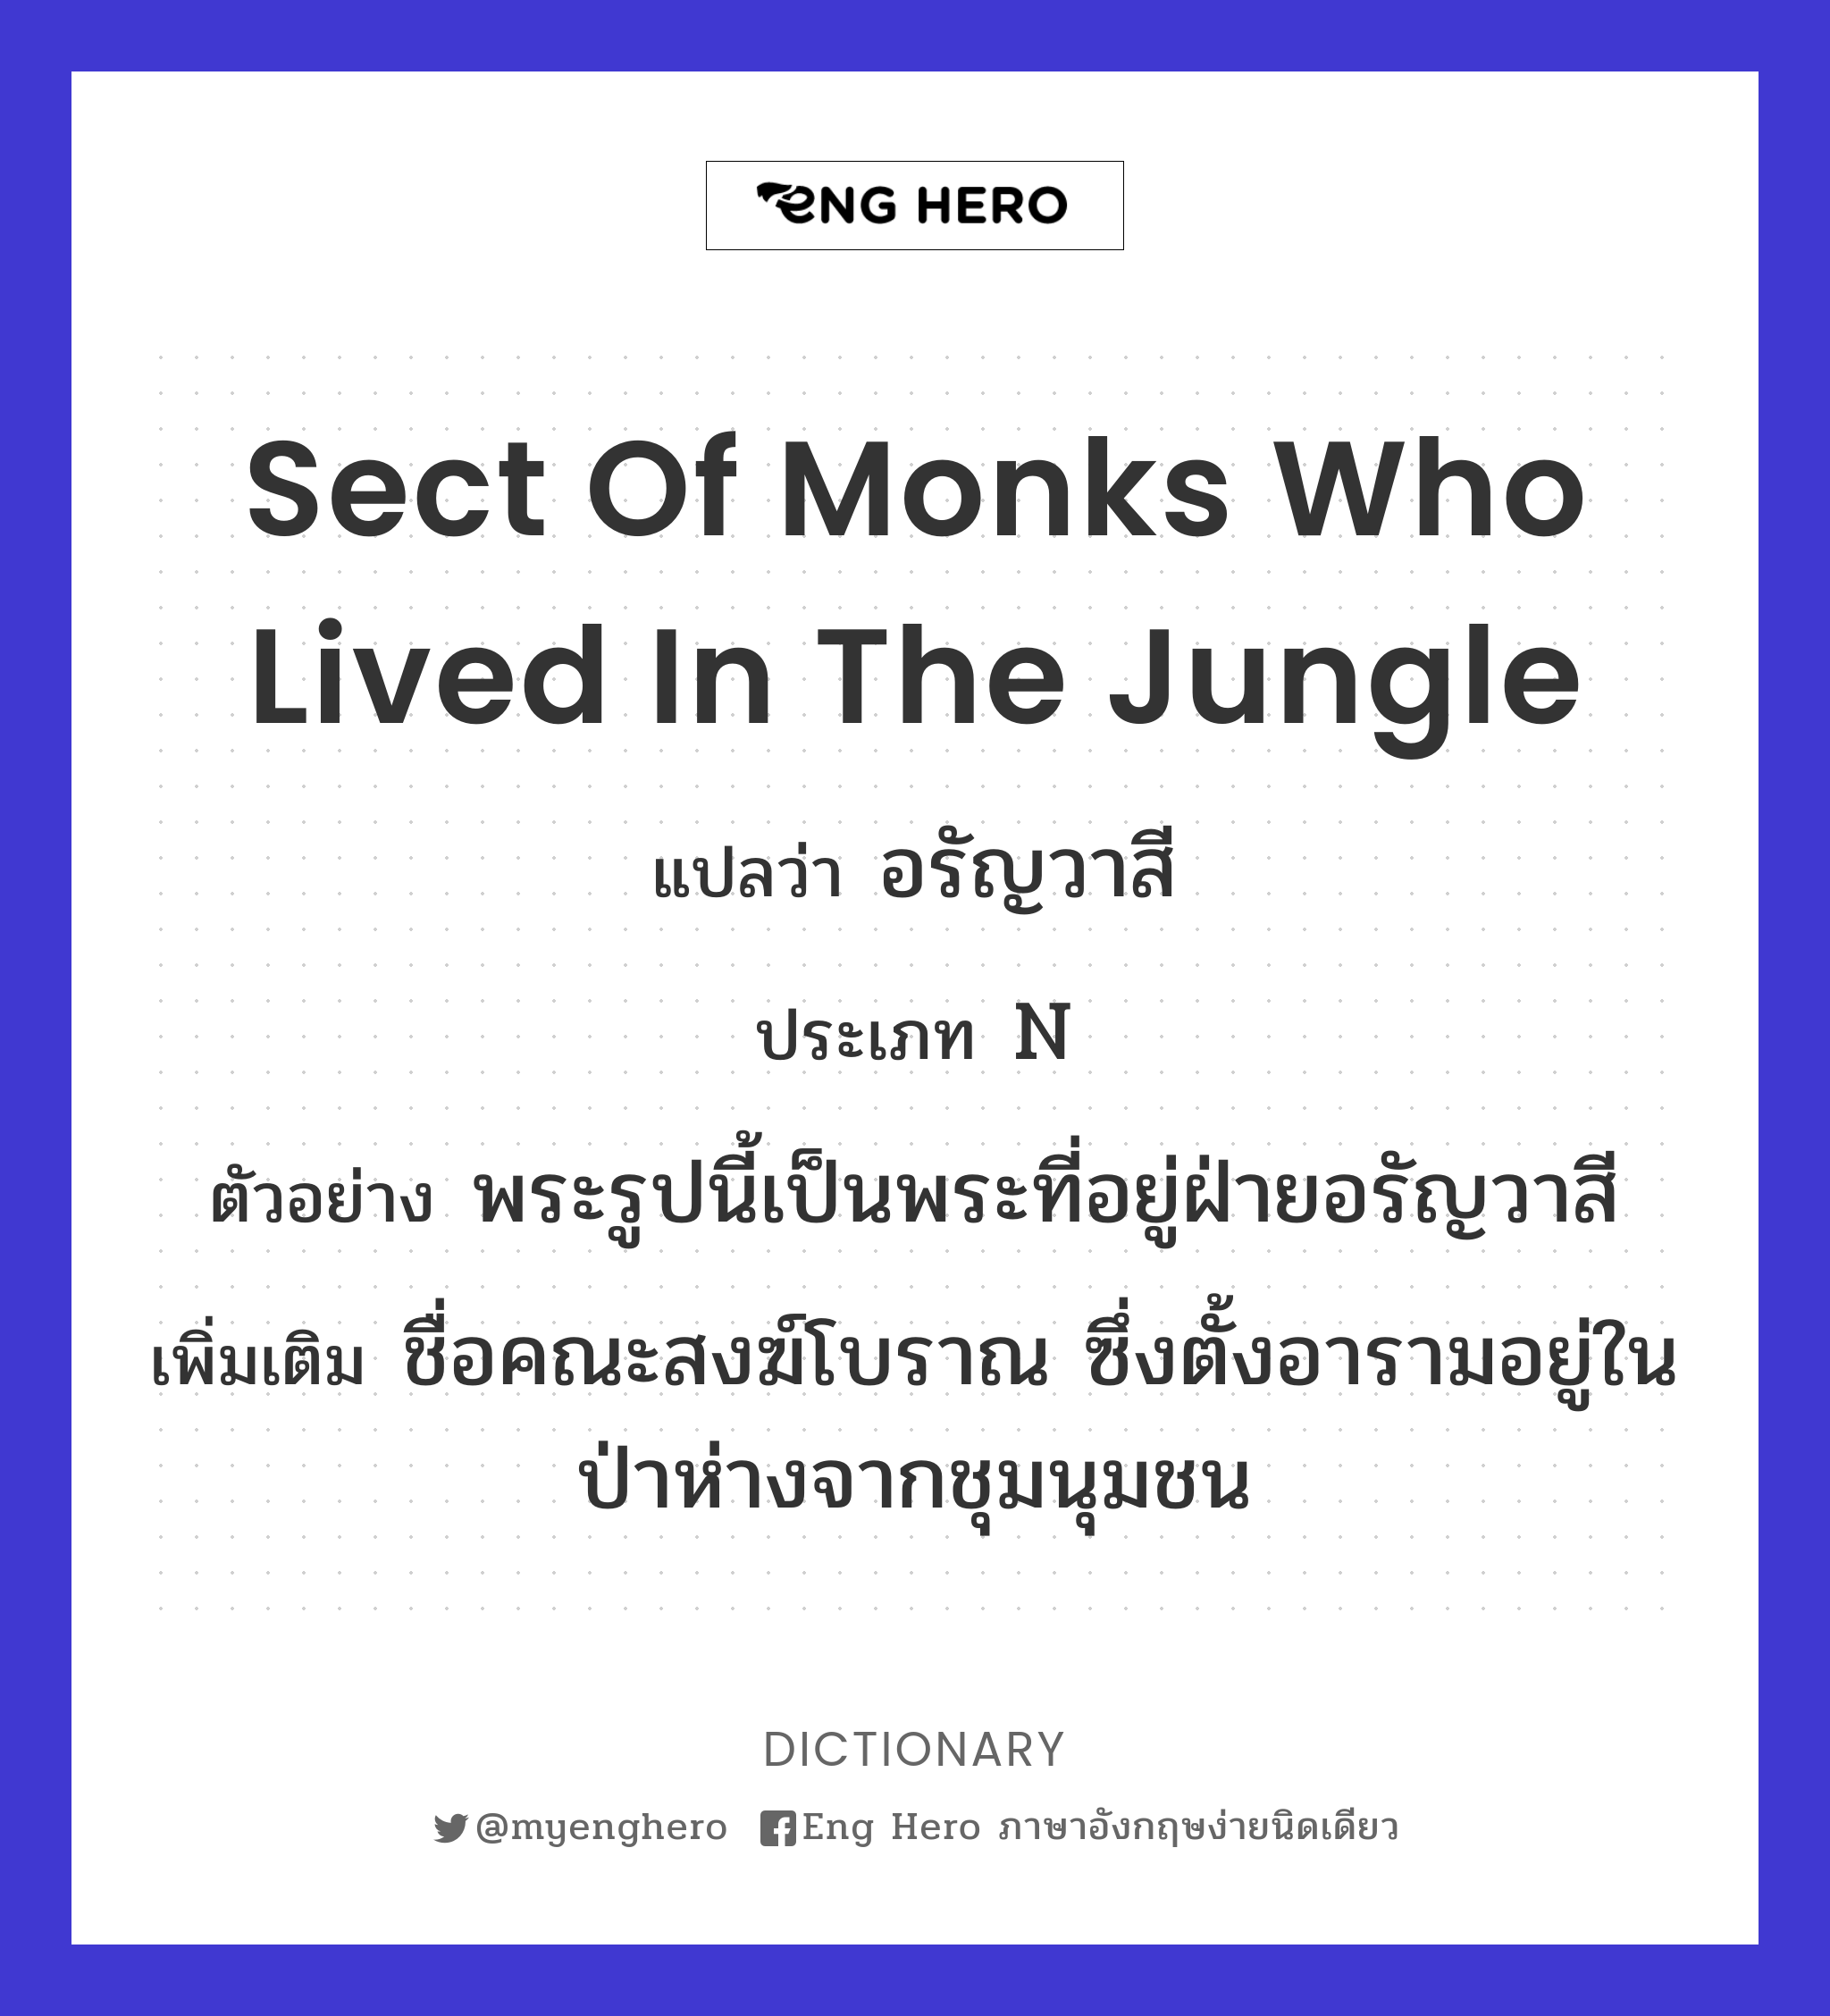 sect of monks who lived in the jungle